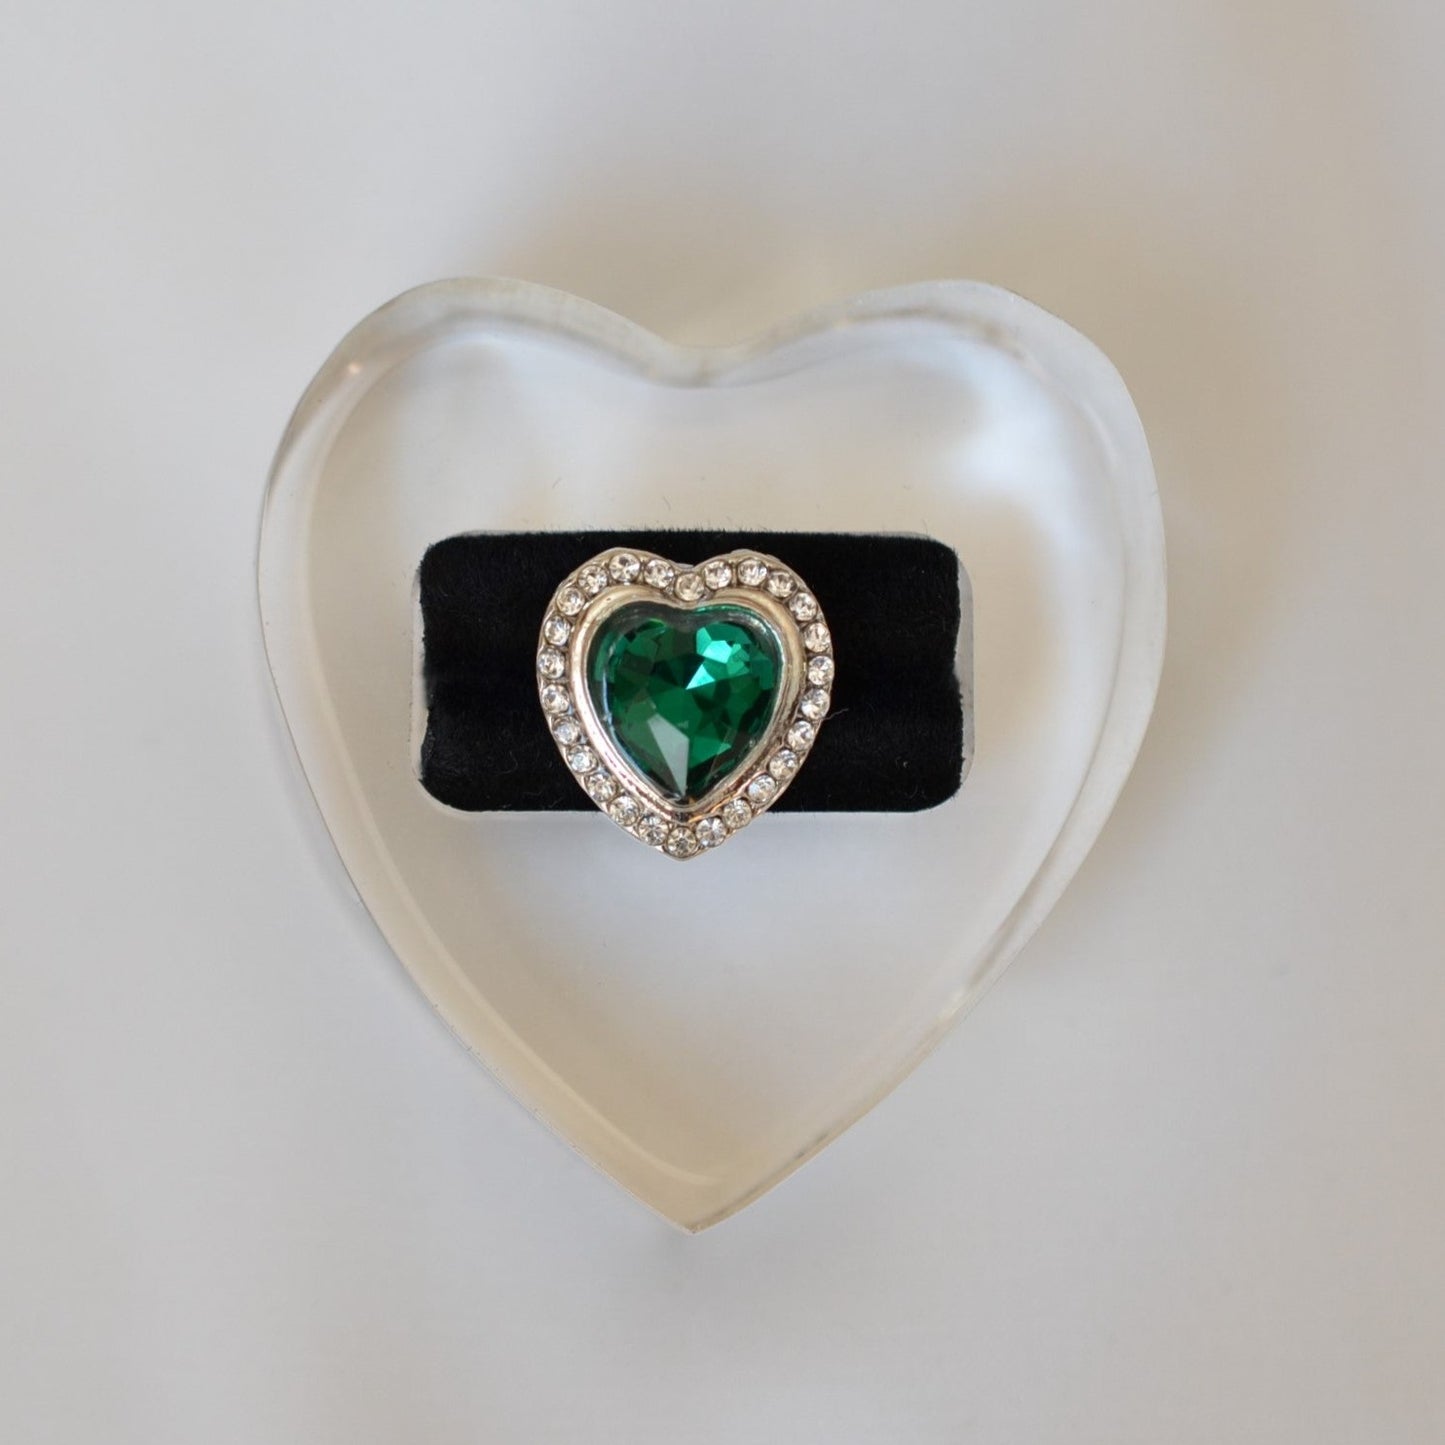 Green Heart Stone Charm for belts, bags and watch bands